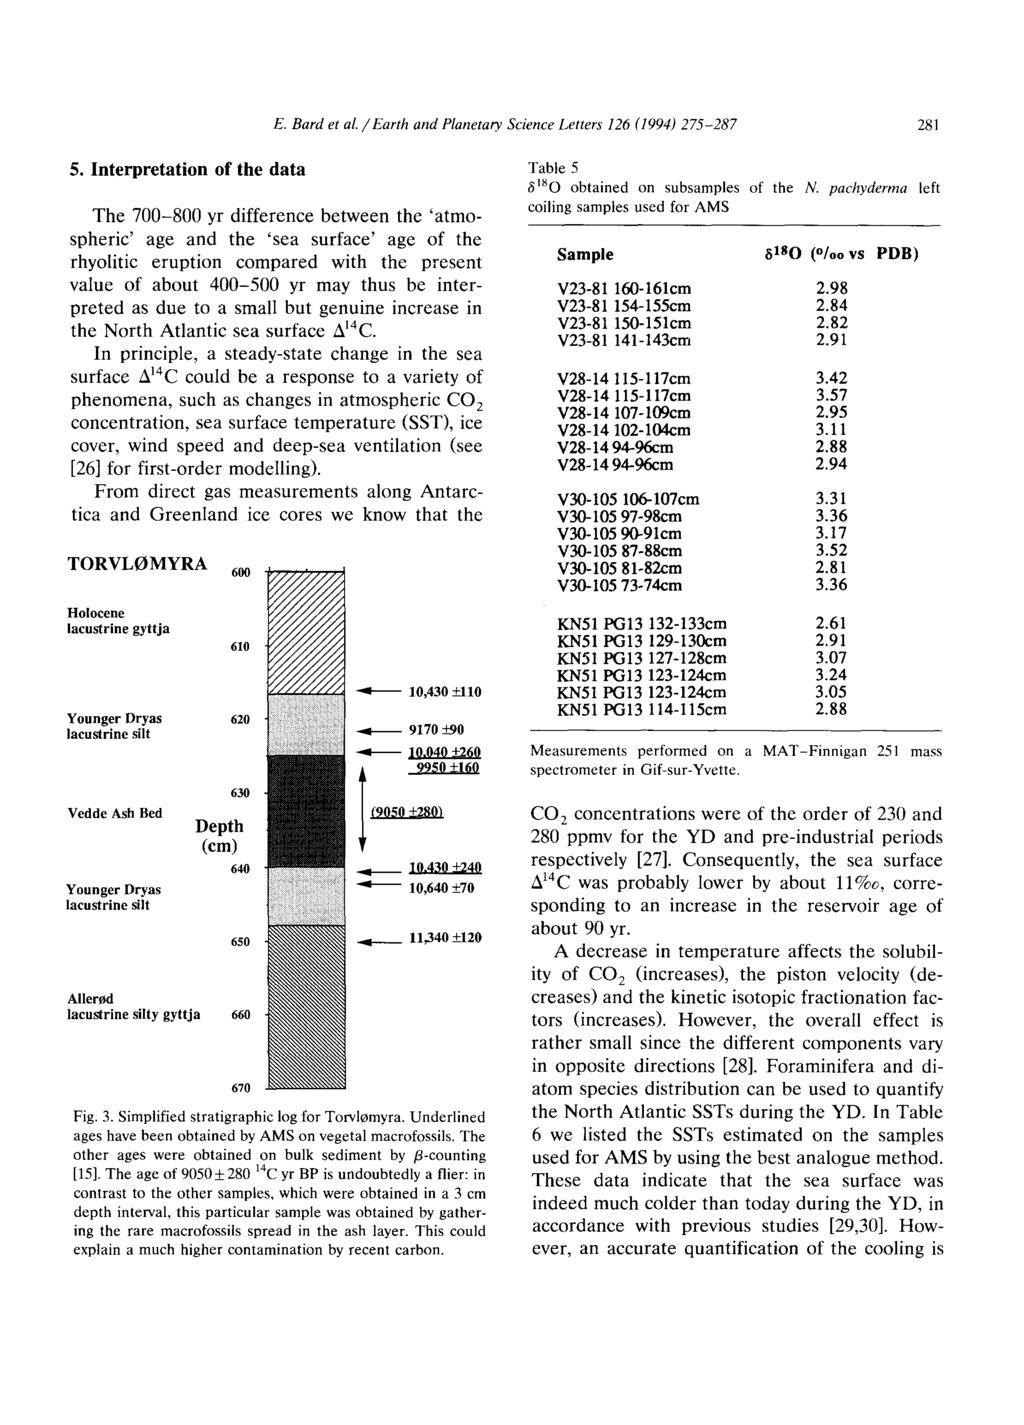 E. Bard et al. / Earth and Planetary Science Letters 126 (1994) 275-287 281 5.